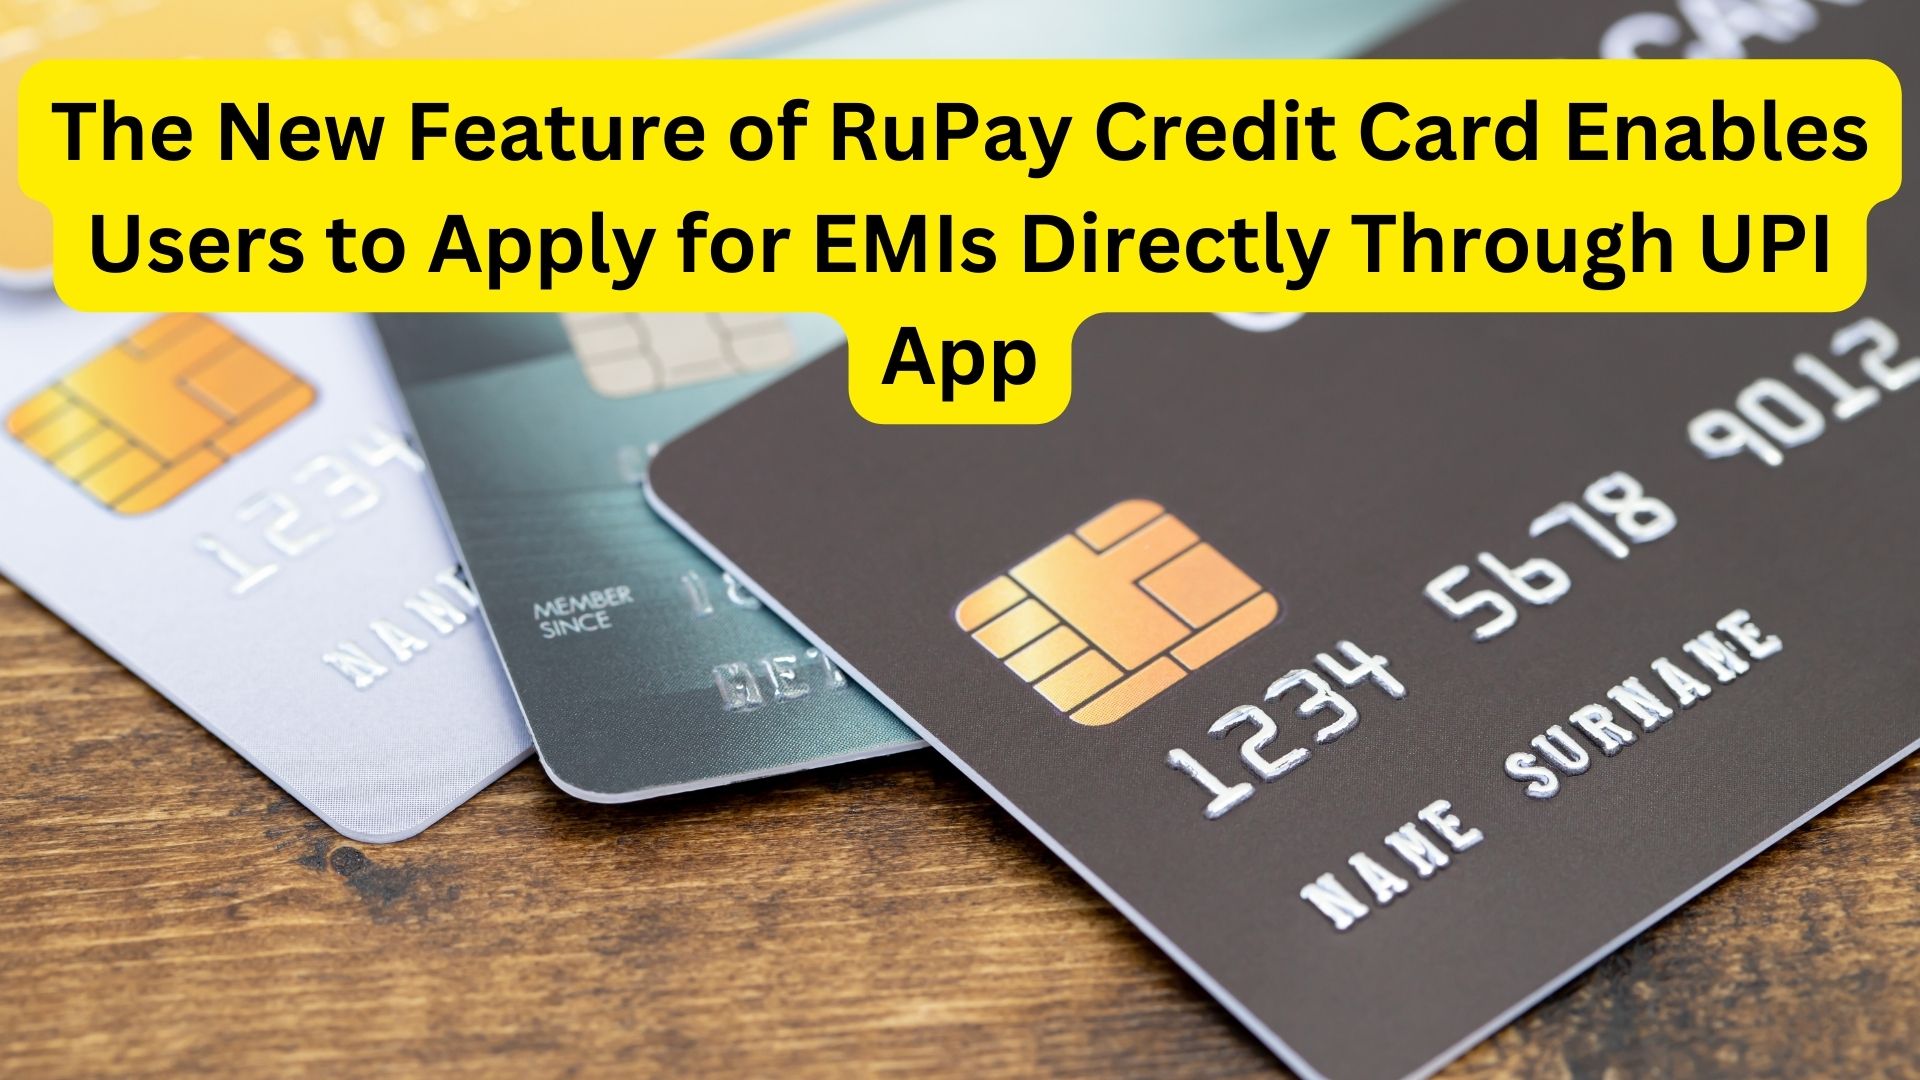 The New Feature of RuPay Credit Card Enables Users to Apply for EMIs Directly Through UPI App